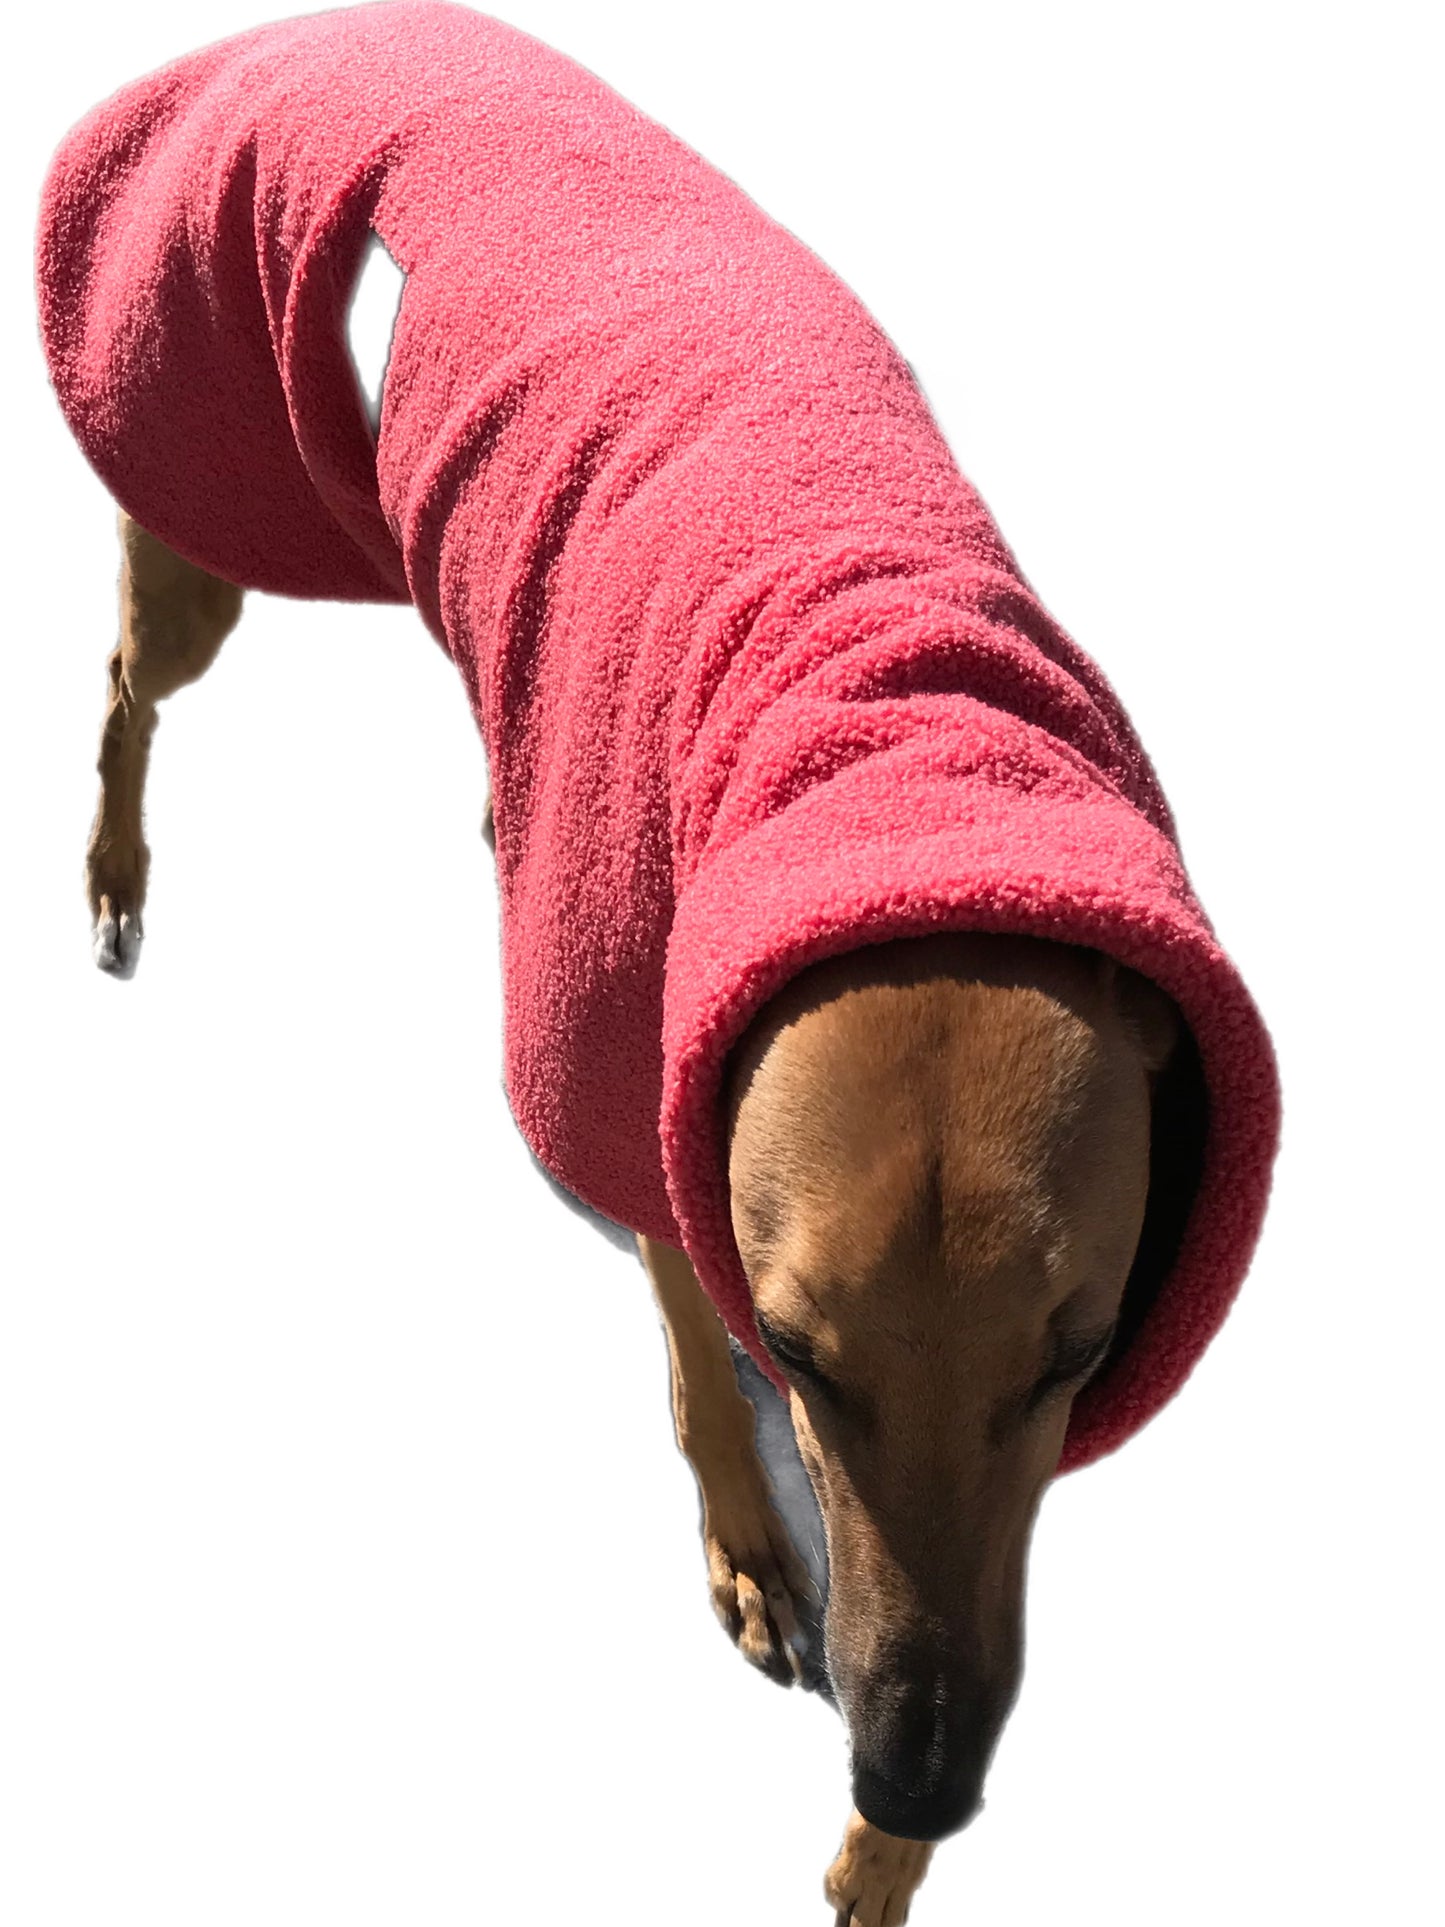 Teddy fleece extra thick deluxe style greyhound coat with snuggly wide neck roll